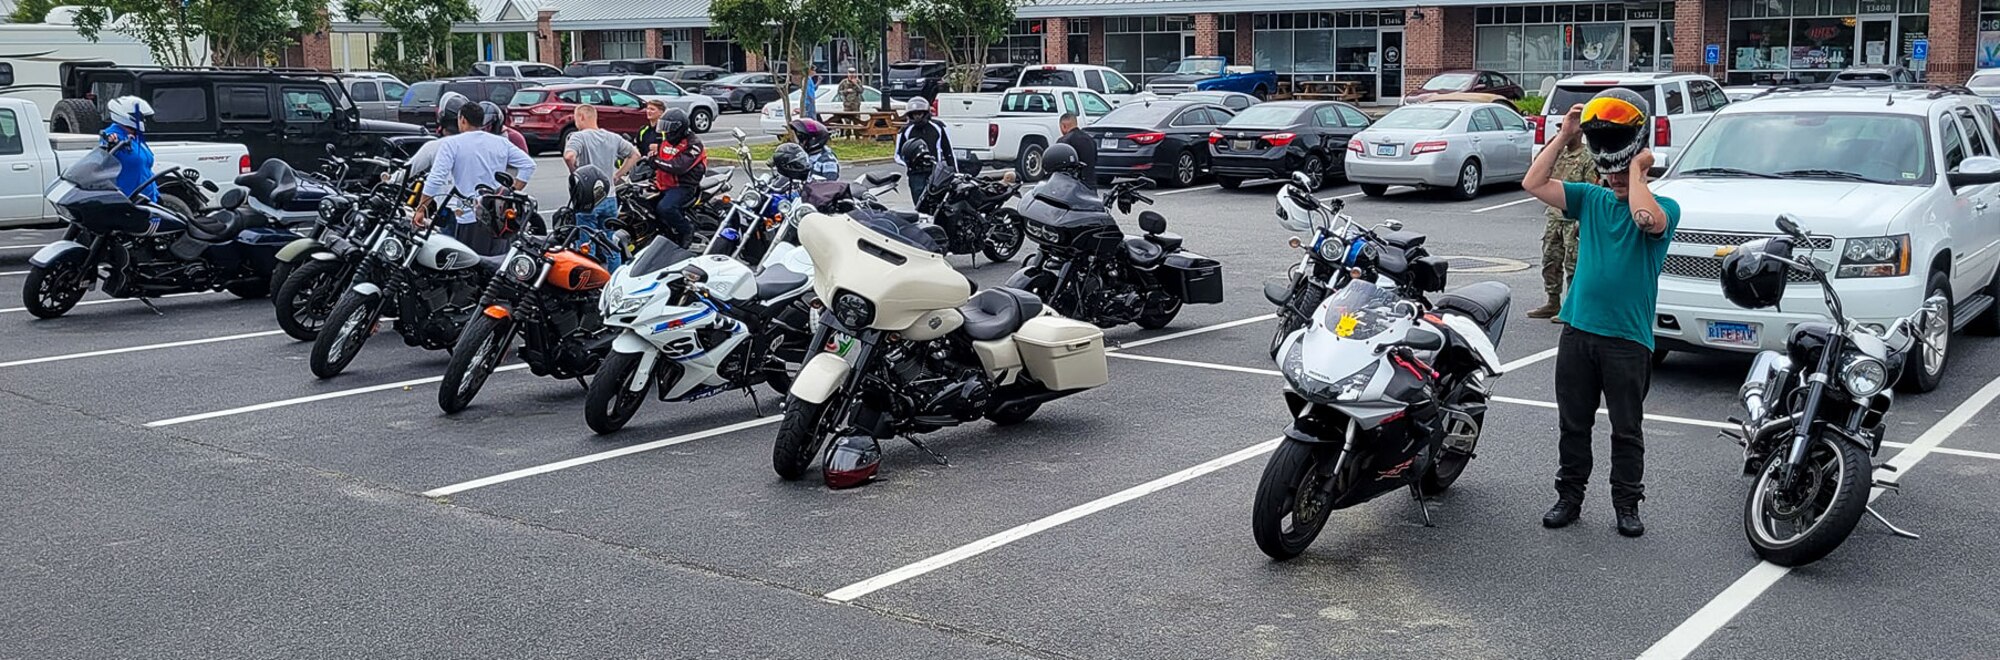 1FW Hosts Motorcycle Ride